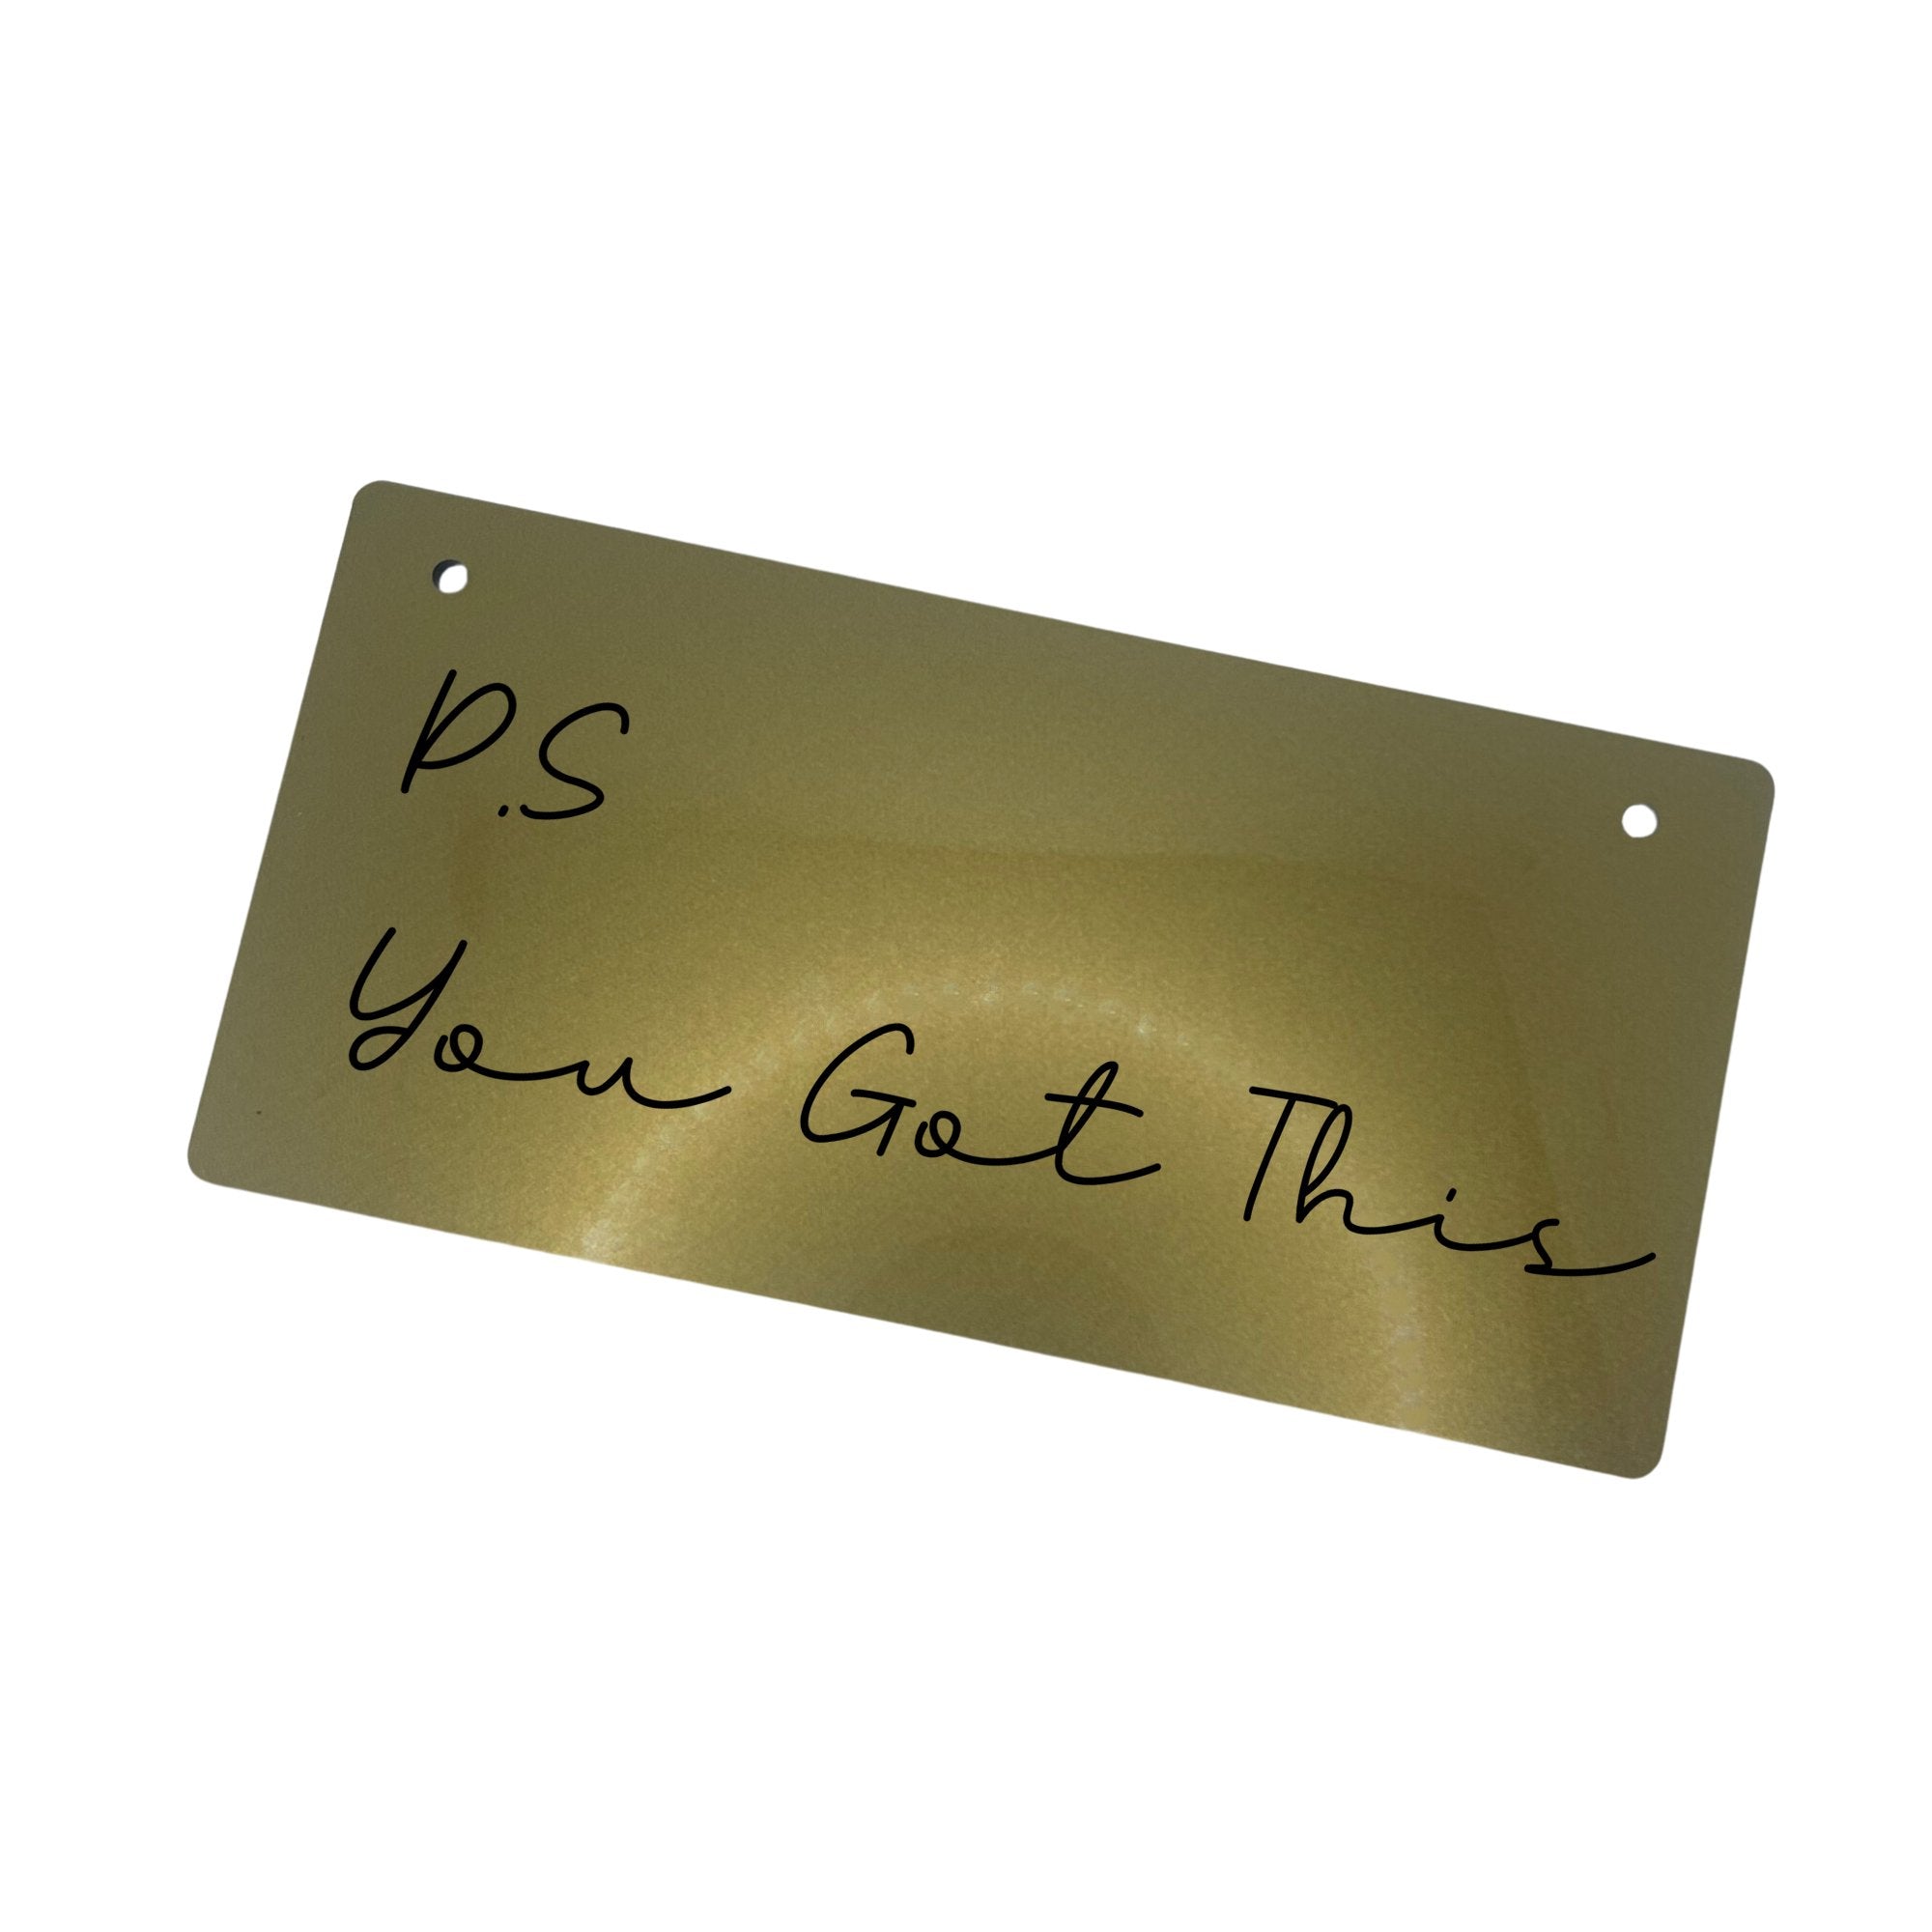 Image featuring the sign in both elegant silver and luxurious gold color options.